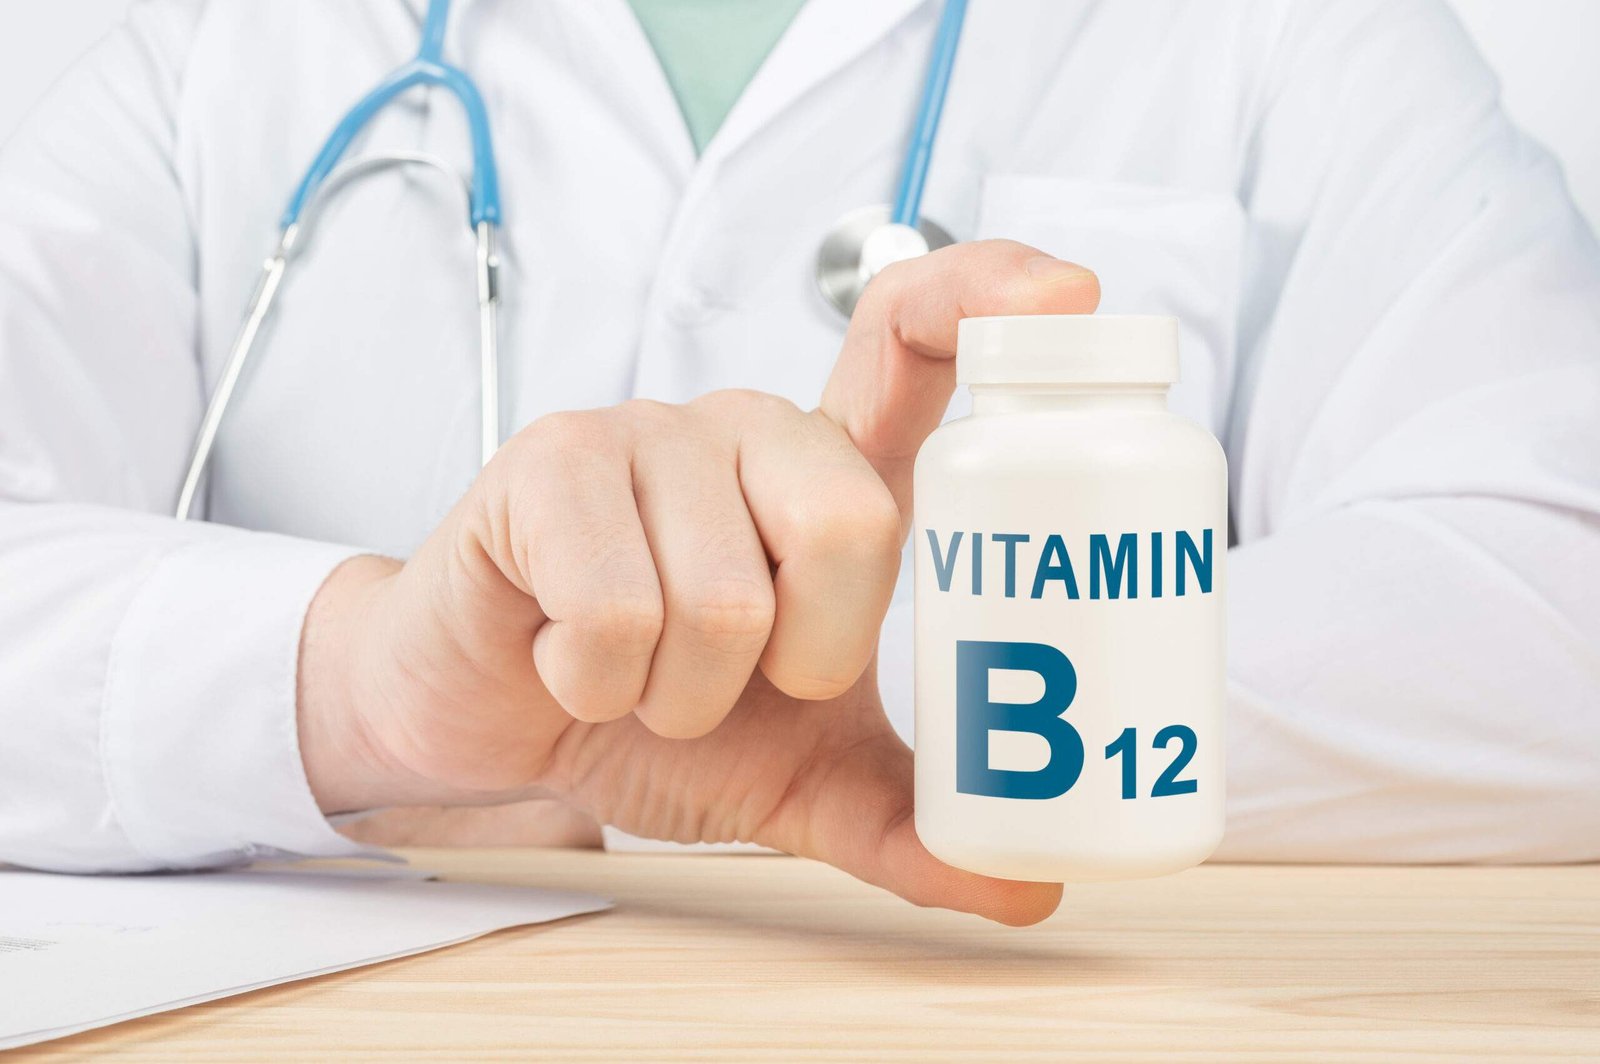 10 Vitamin B12 Benefits that Will Surprise You